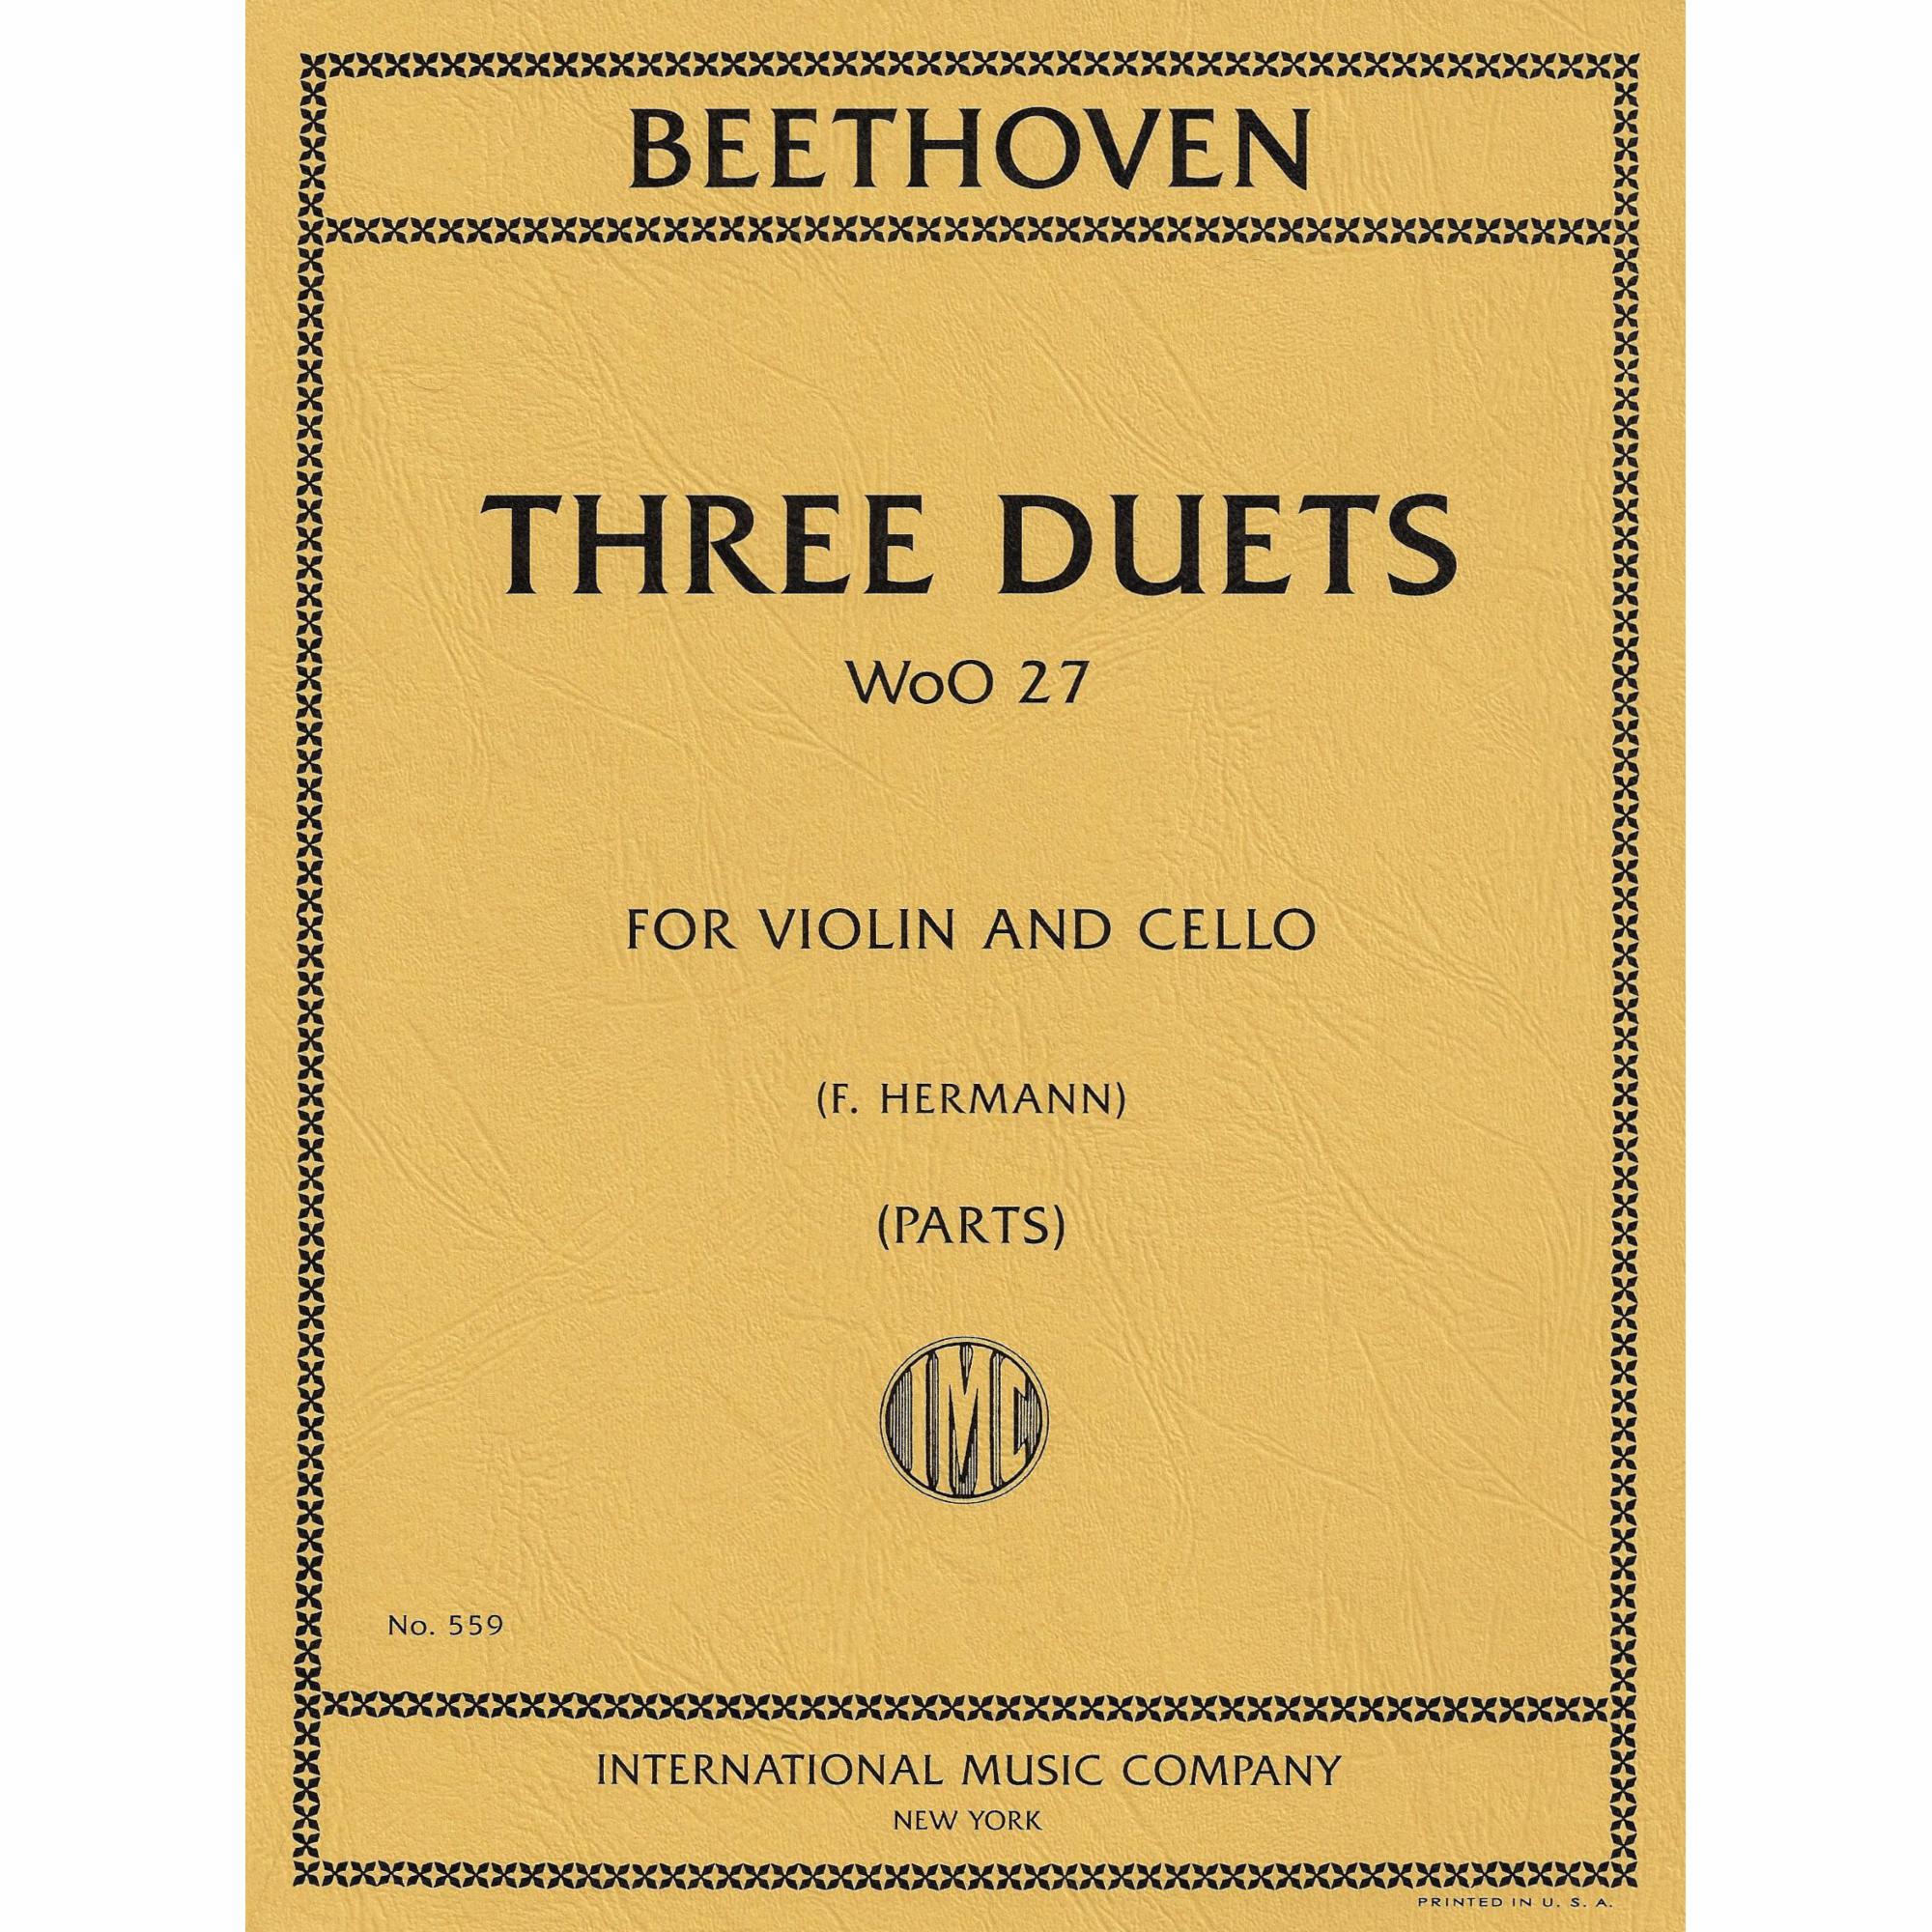 Beethoven -- Three Duets, WoO 27 for Violin and Cello